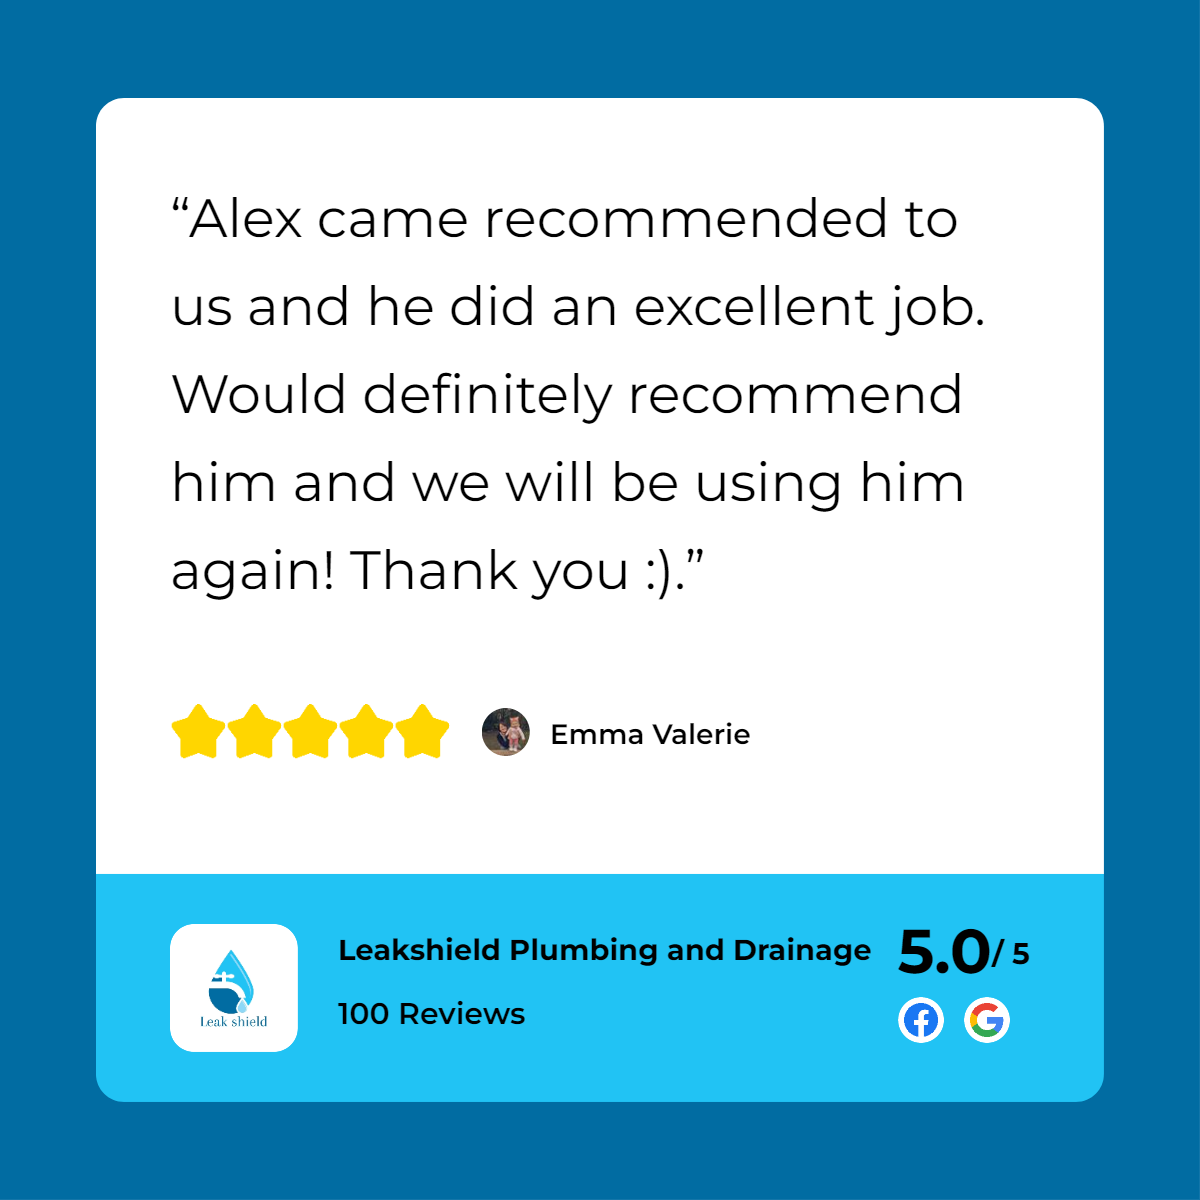 A customer review for alex plumbing.